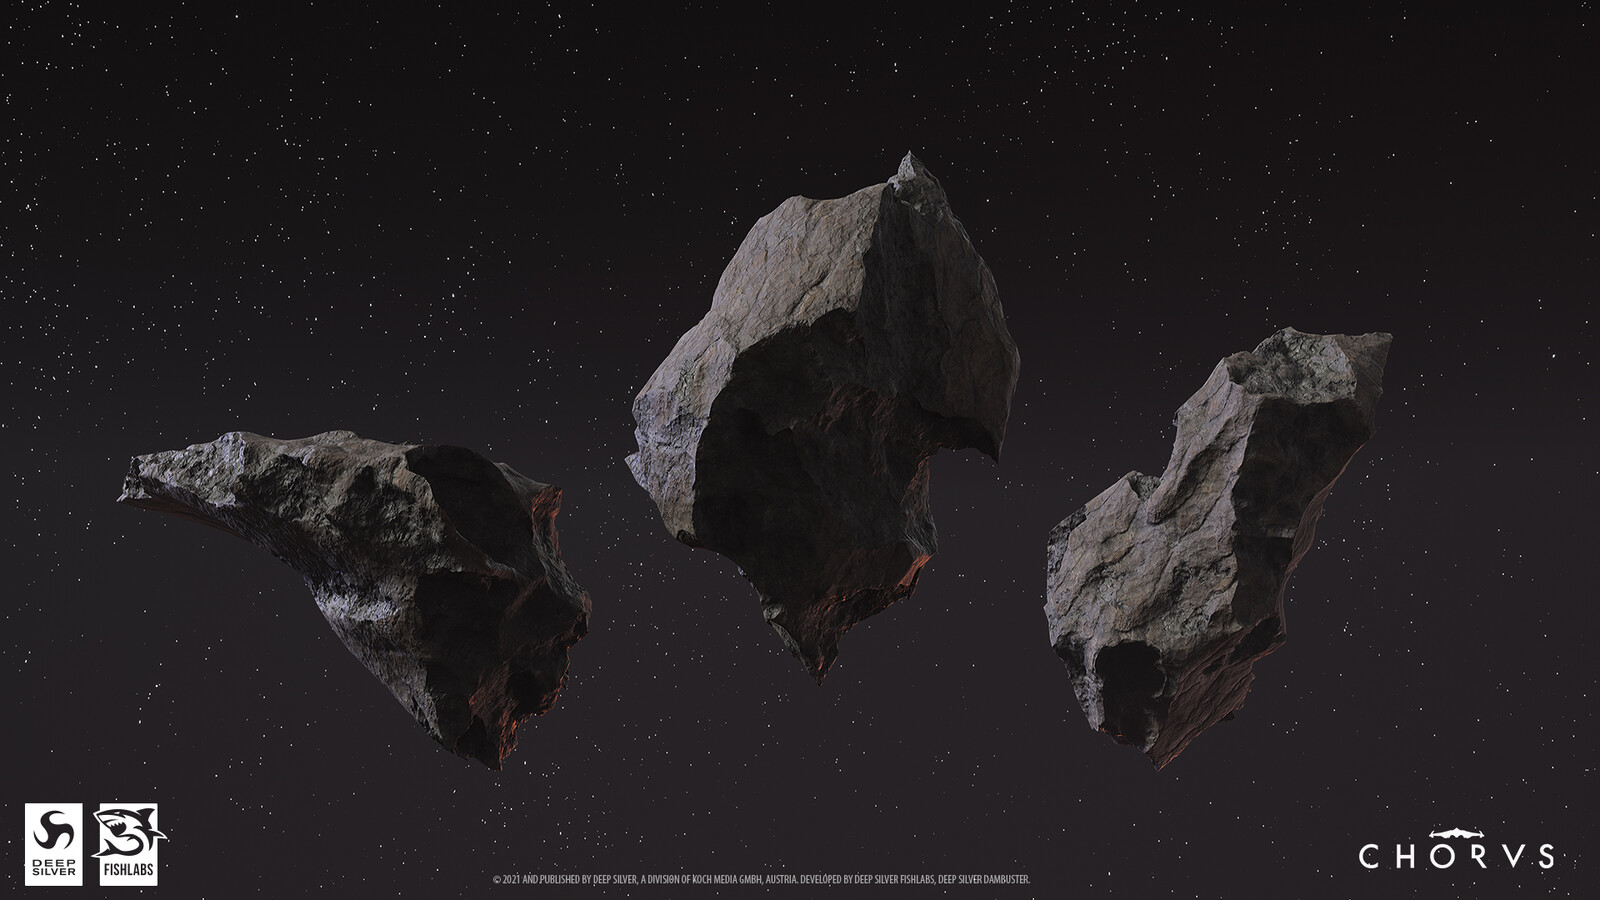 Large asteroids